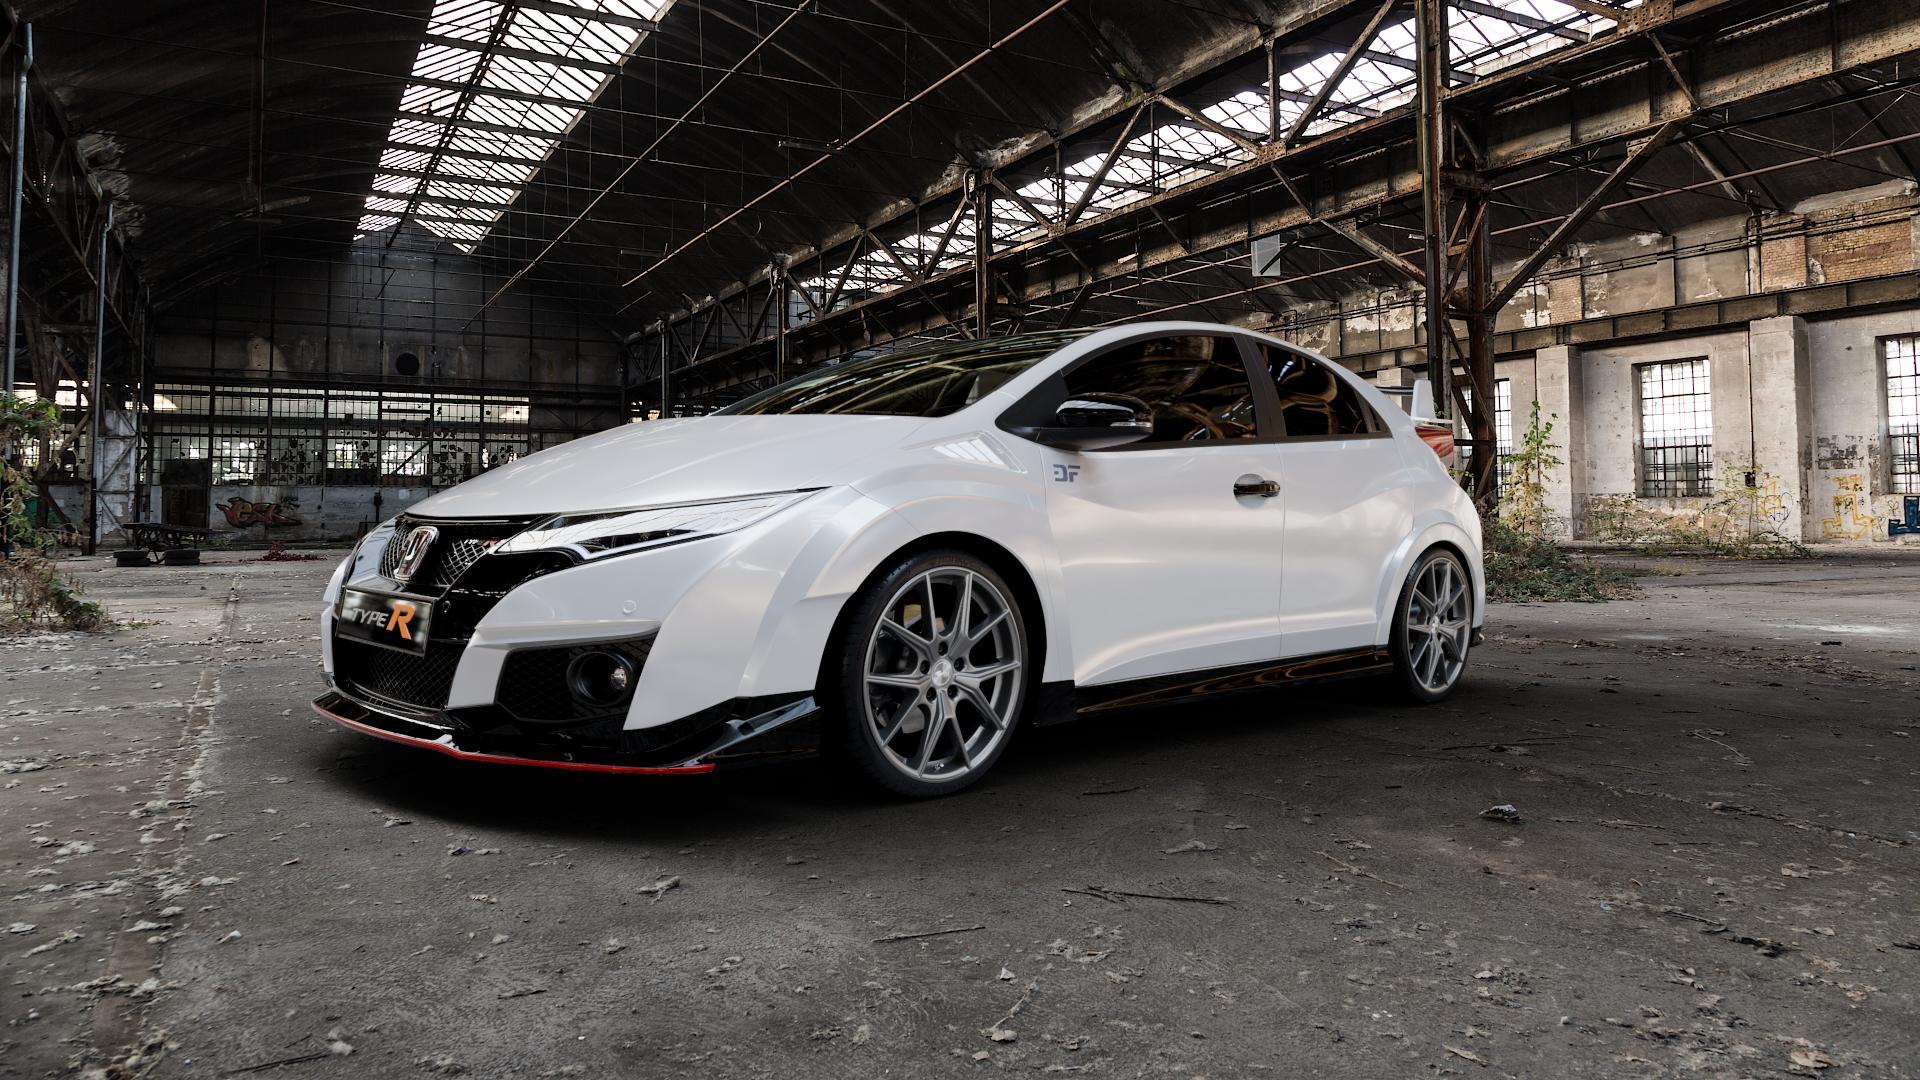 Honda - Civic 9 (FK) Wheels and Tyre Packages | velonity.com